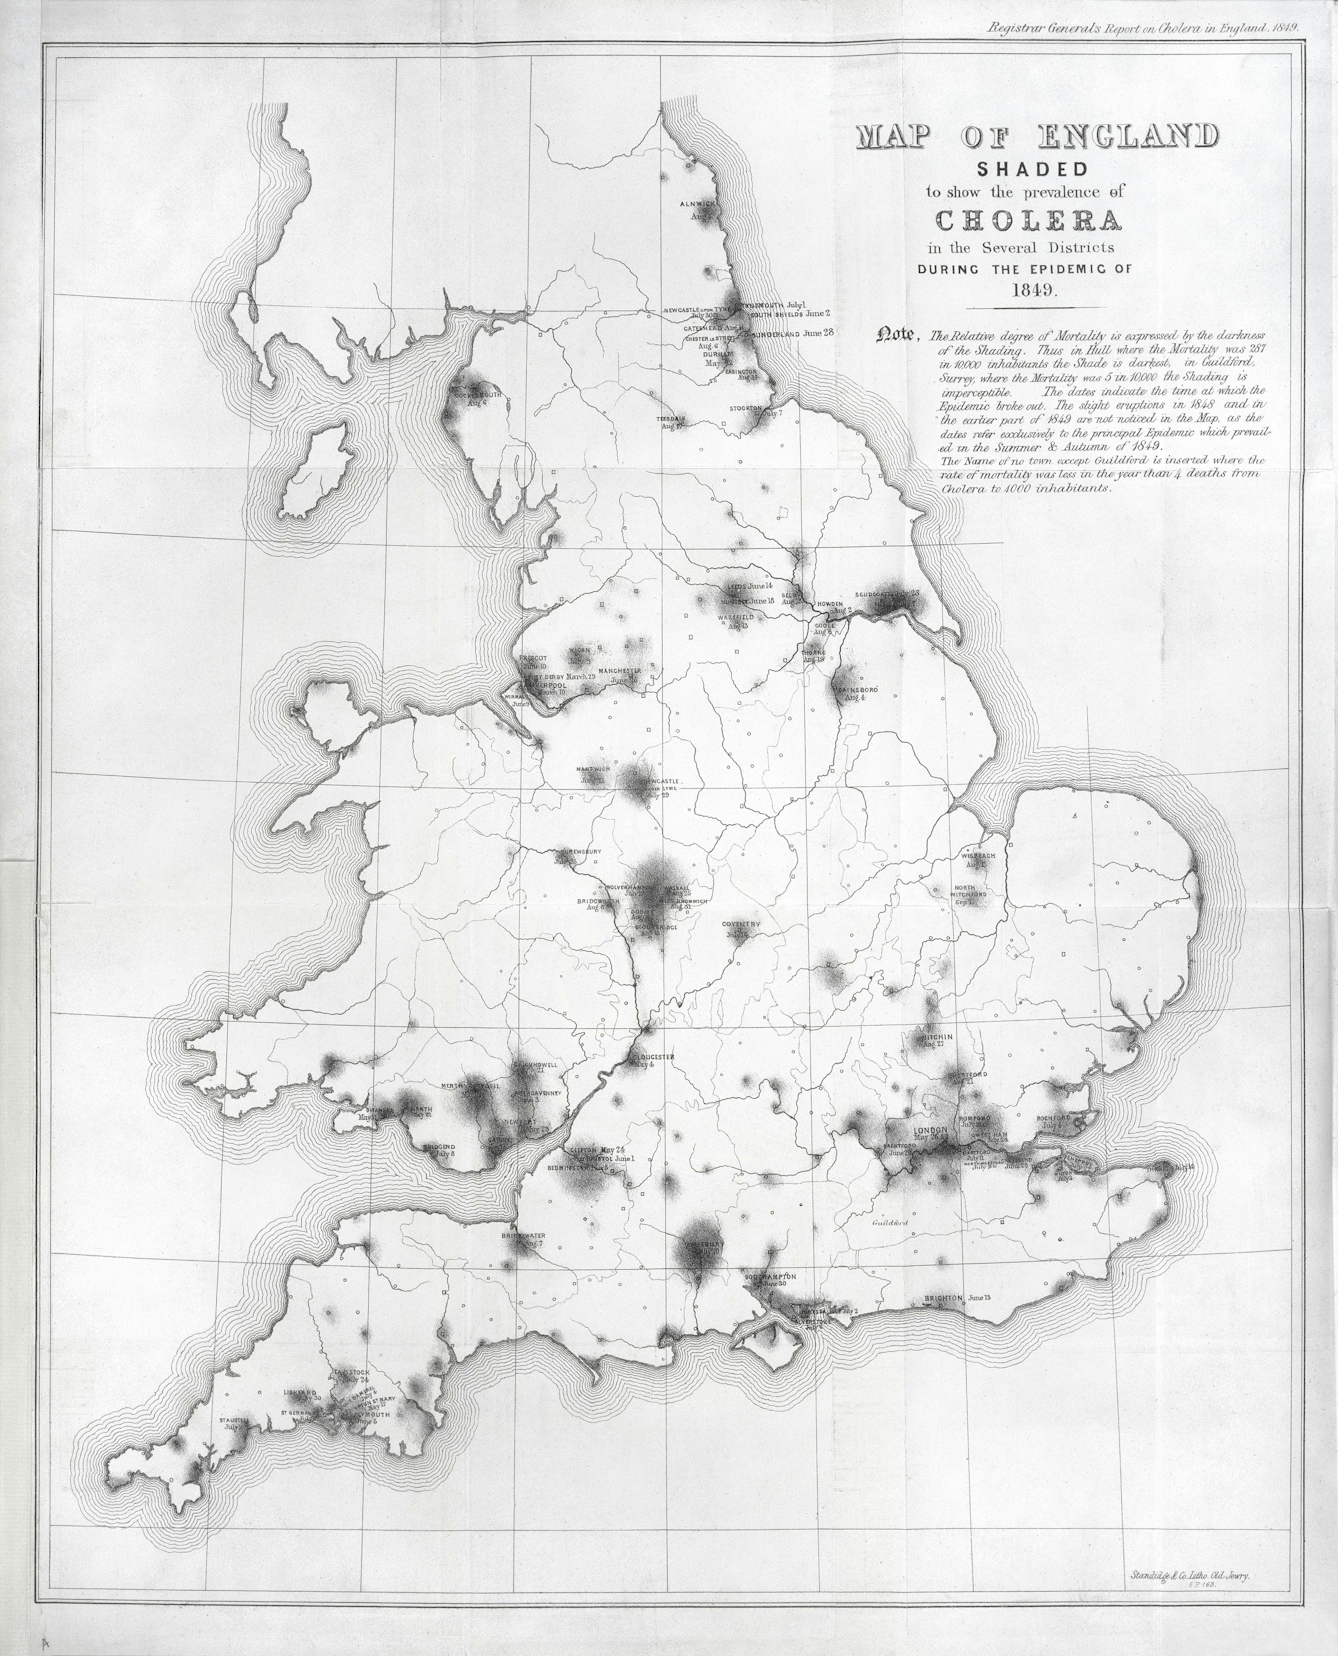 Map of England showing prevalence of cholera, 1849